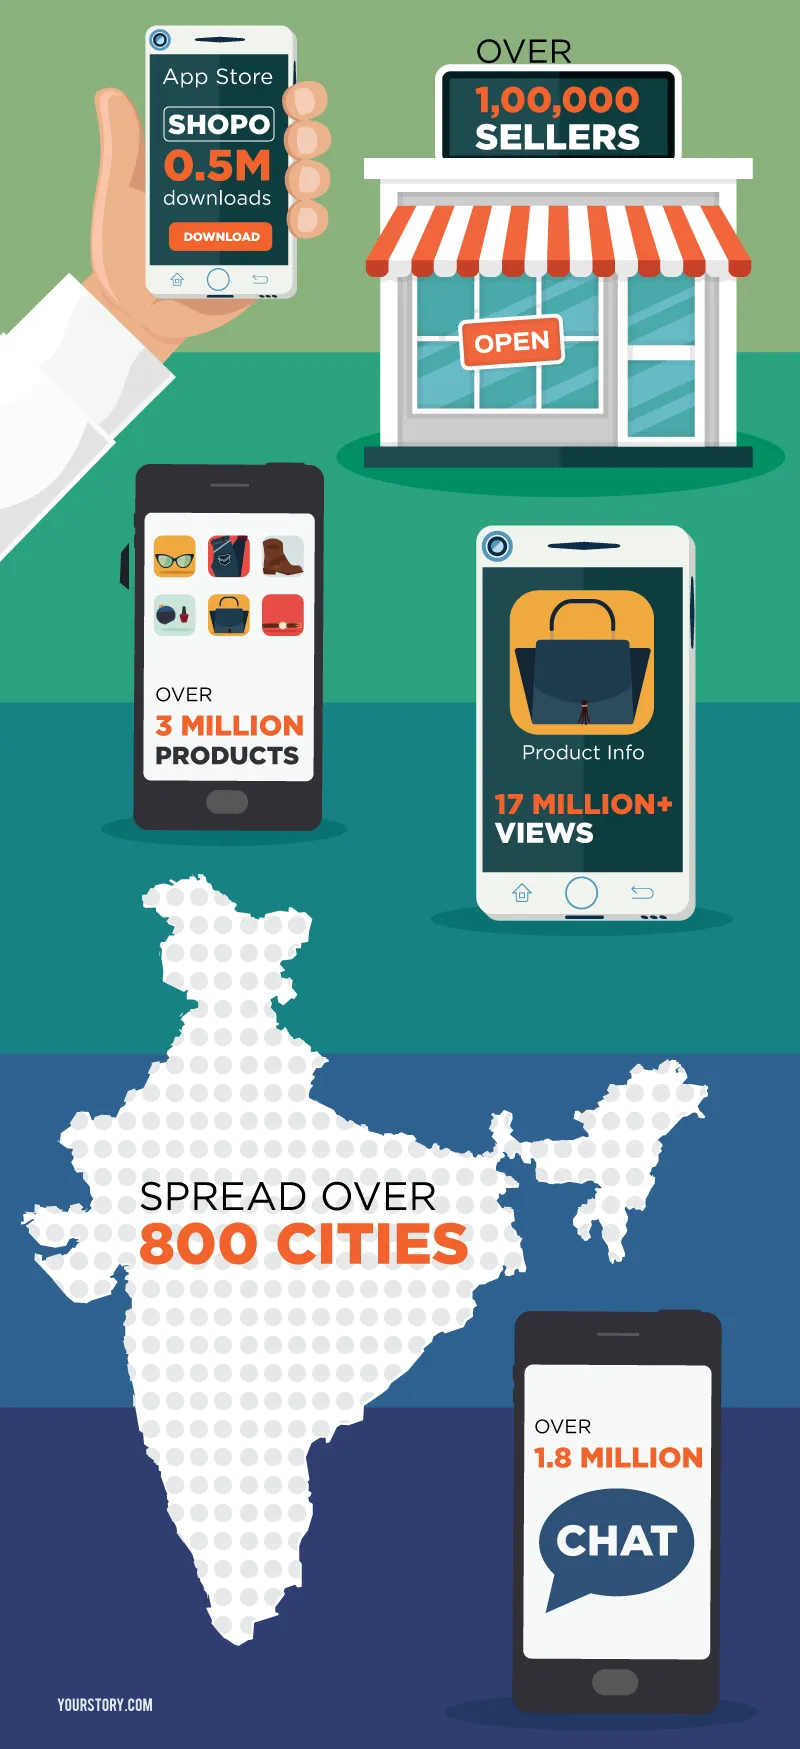 Shopo-App_Infographic_Yourstory